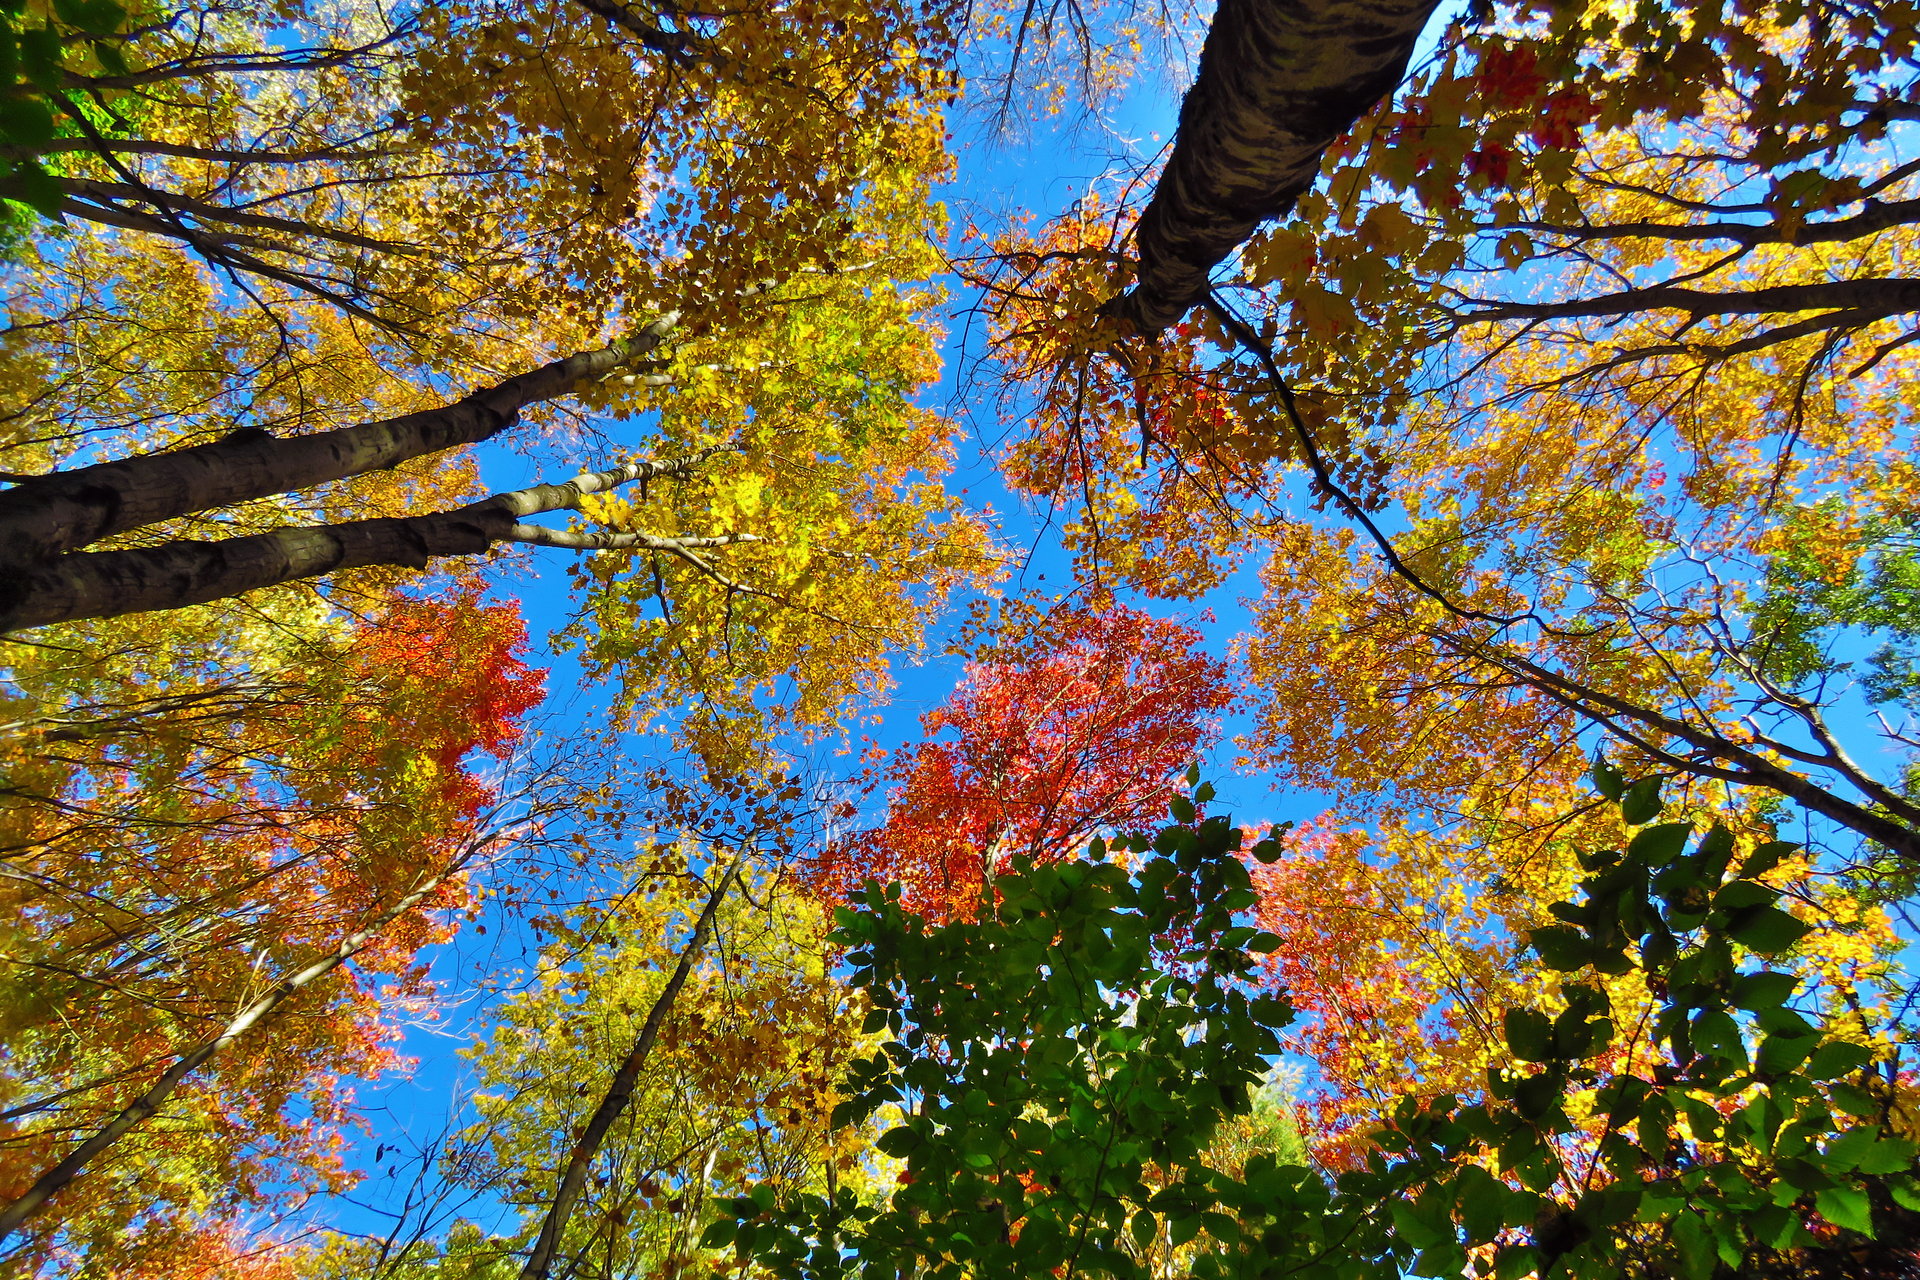 looking up at the tree canopy in fall -- reds, yellows, oranges, greens